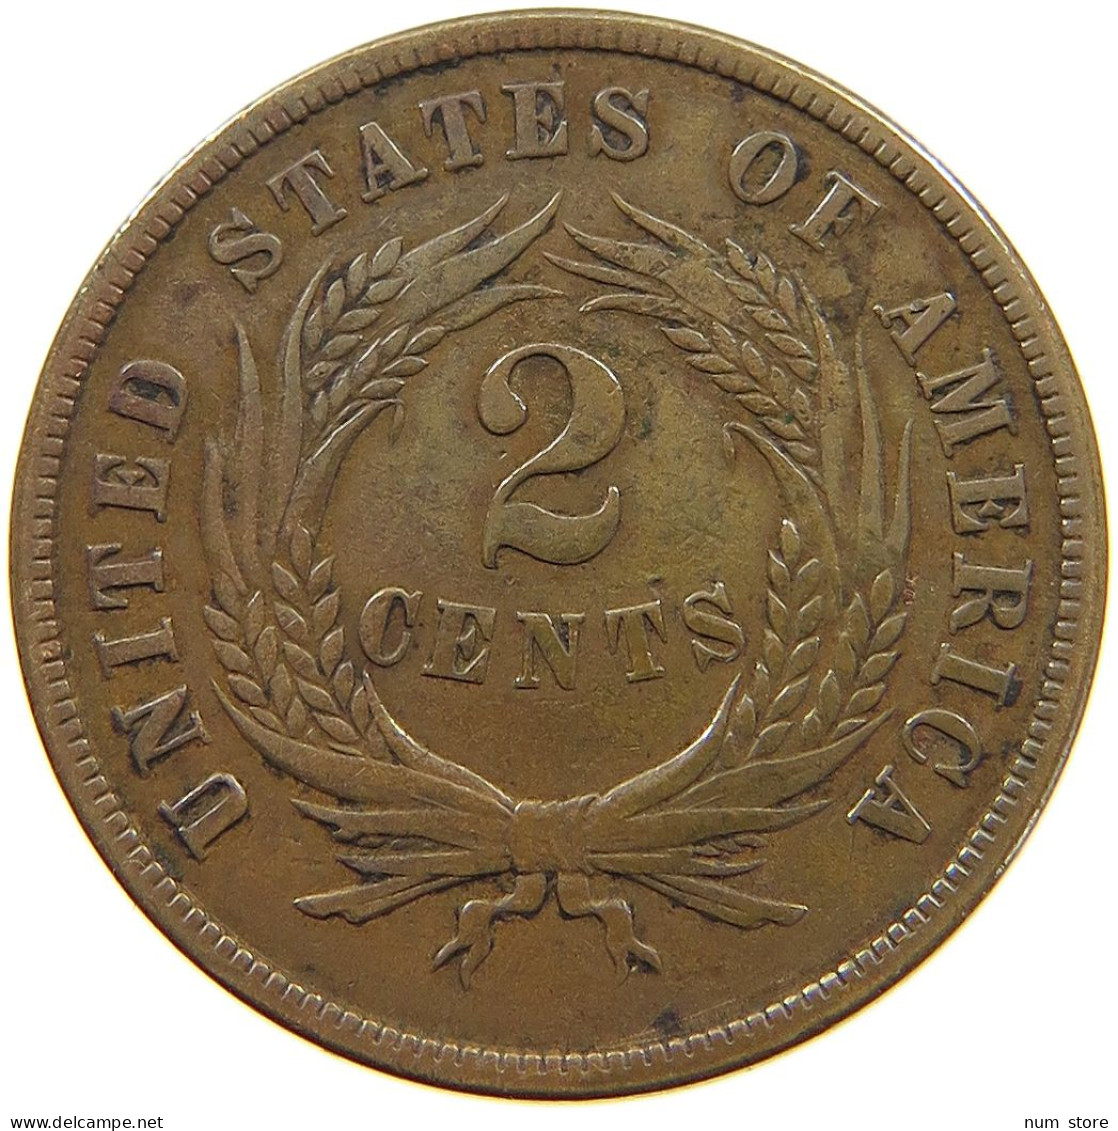 UNITED STATES OF AMERICA TWO CENTS 1865  #t086 0135 - 2, 3 & 20 Cents